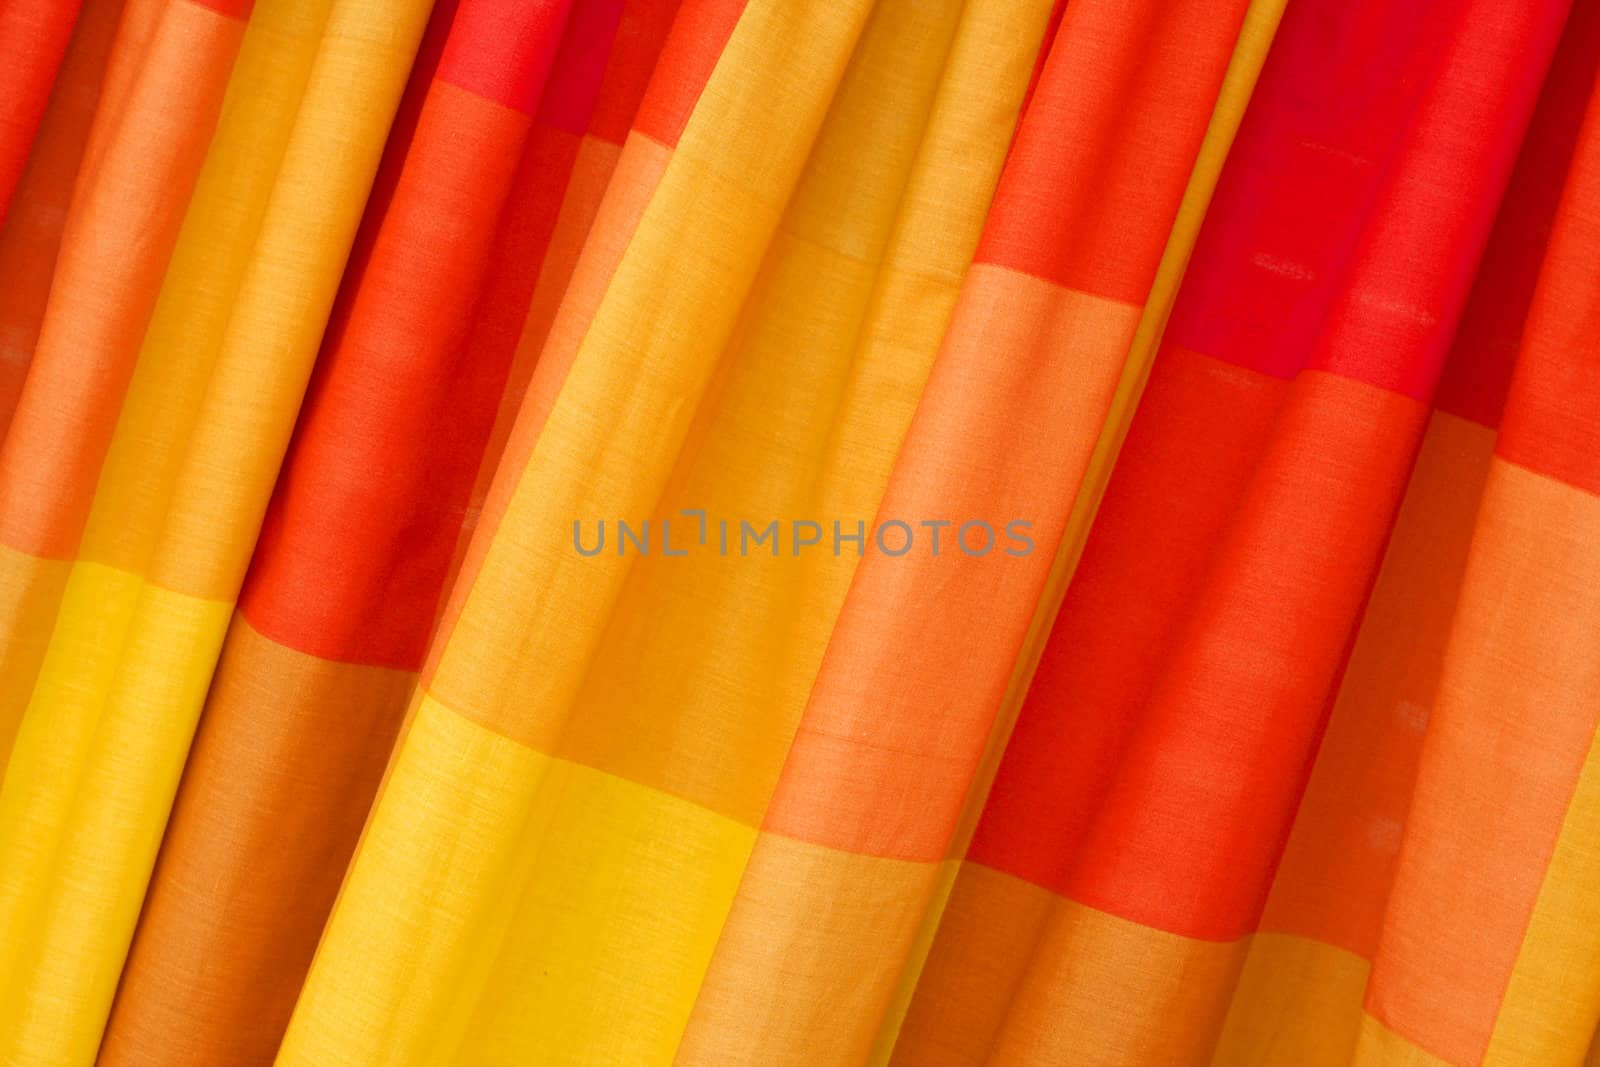 Background texture of a red and orange curtain